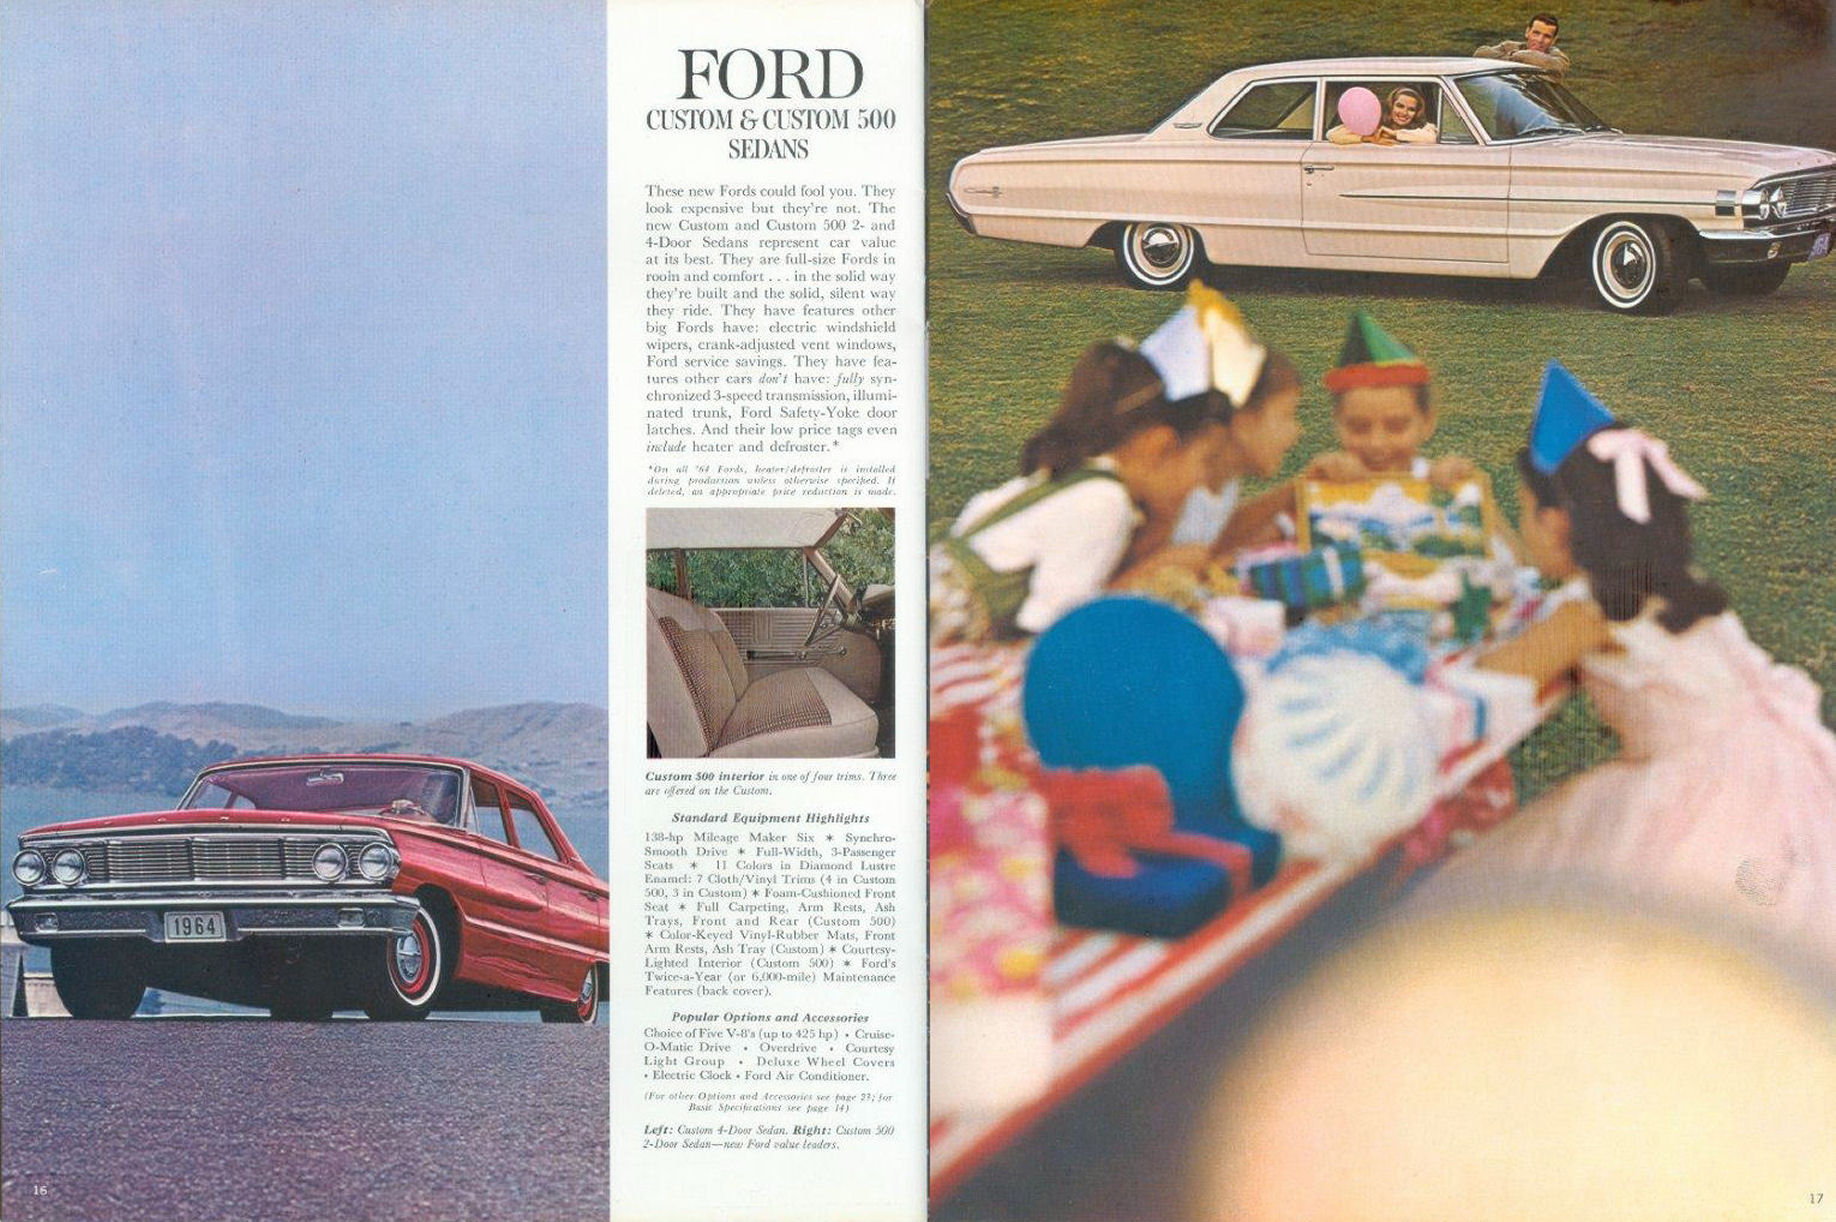 1964_Ford_Full_Size-16-17